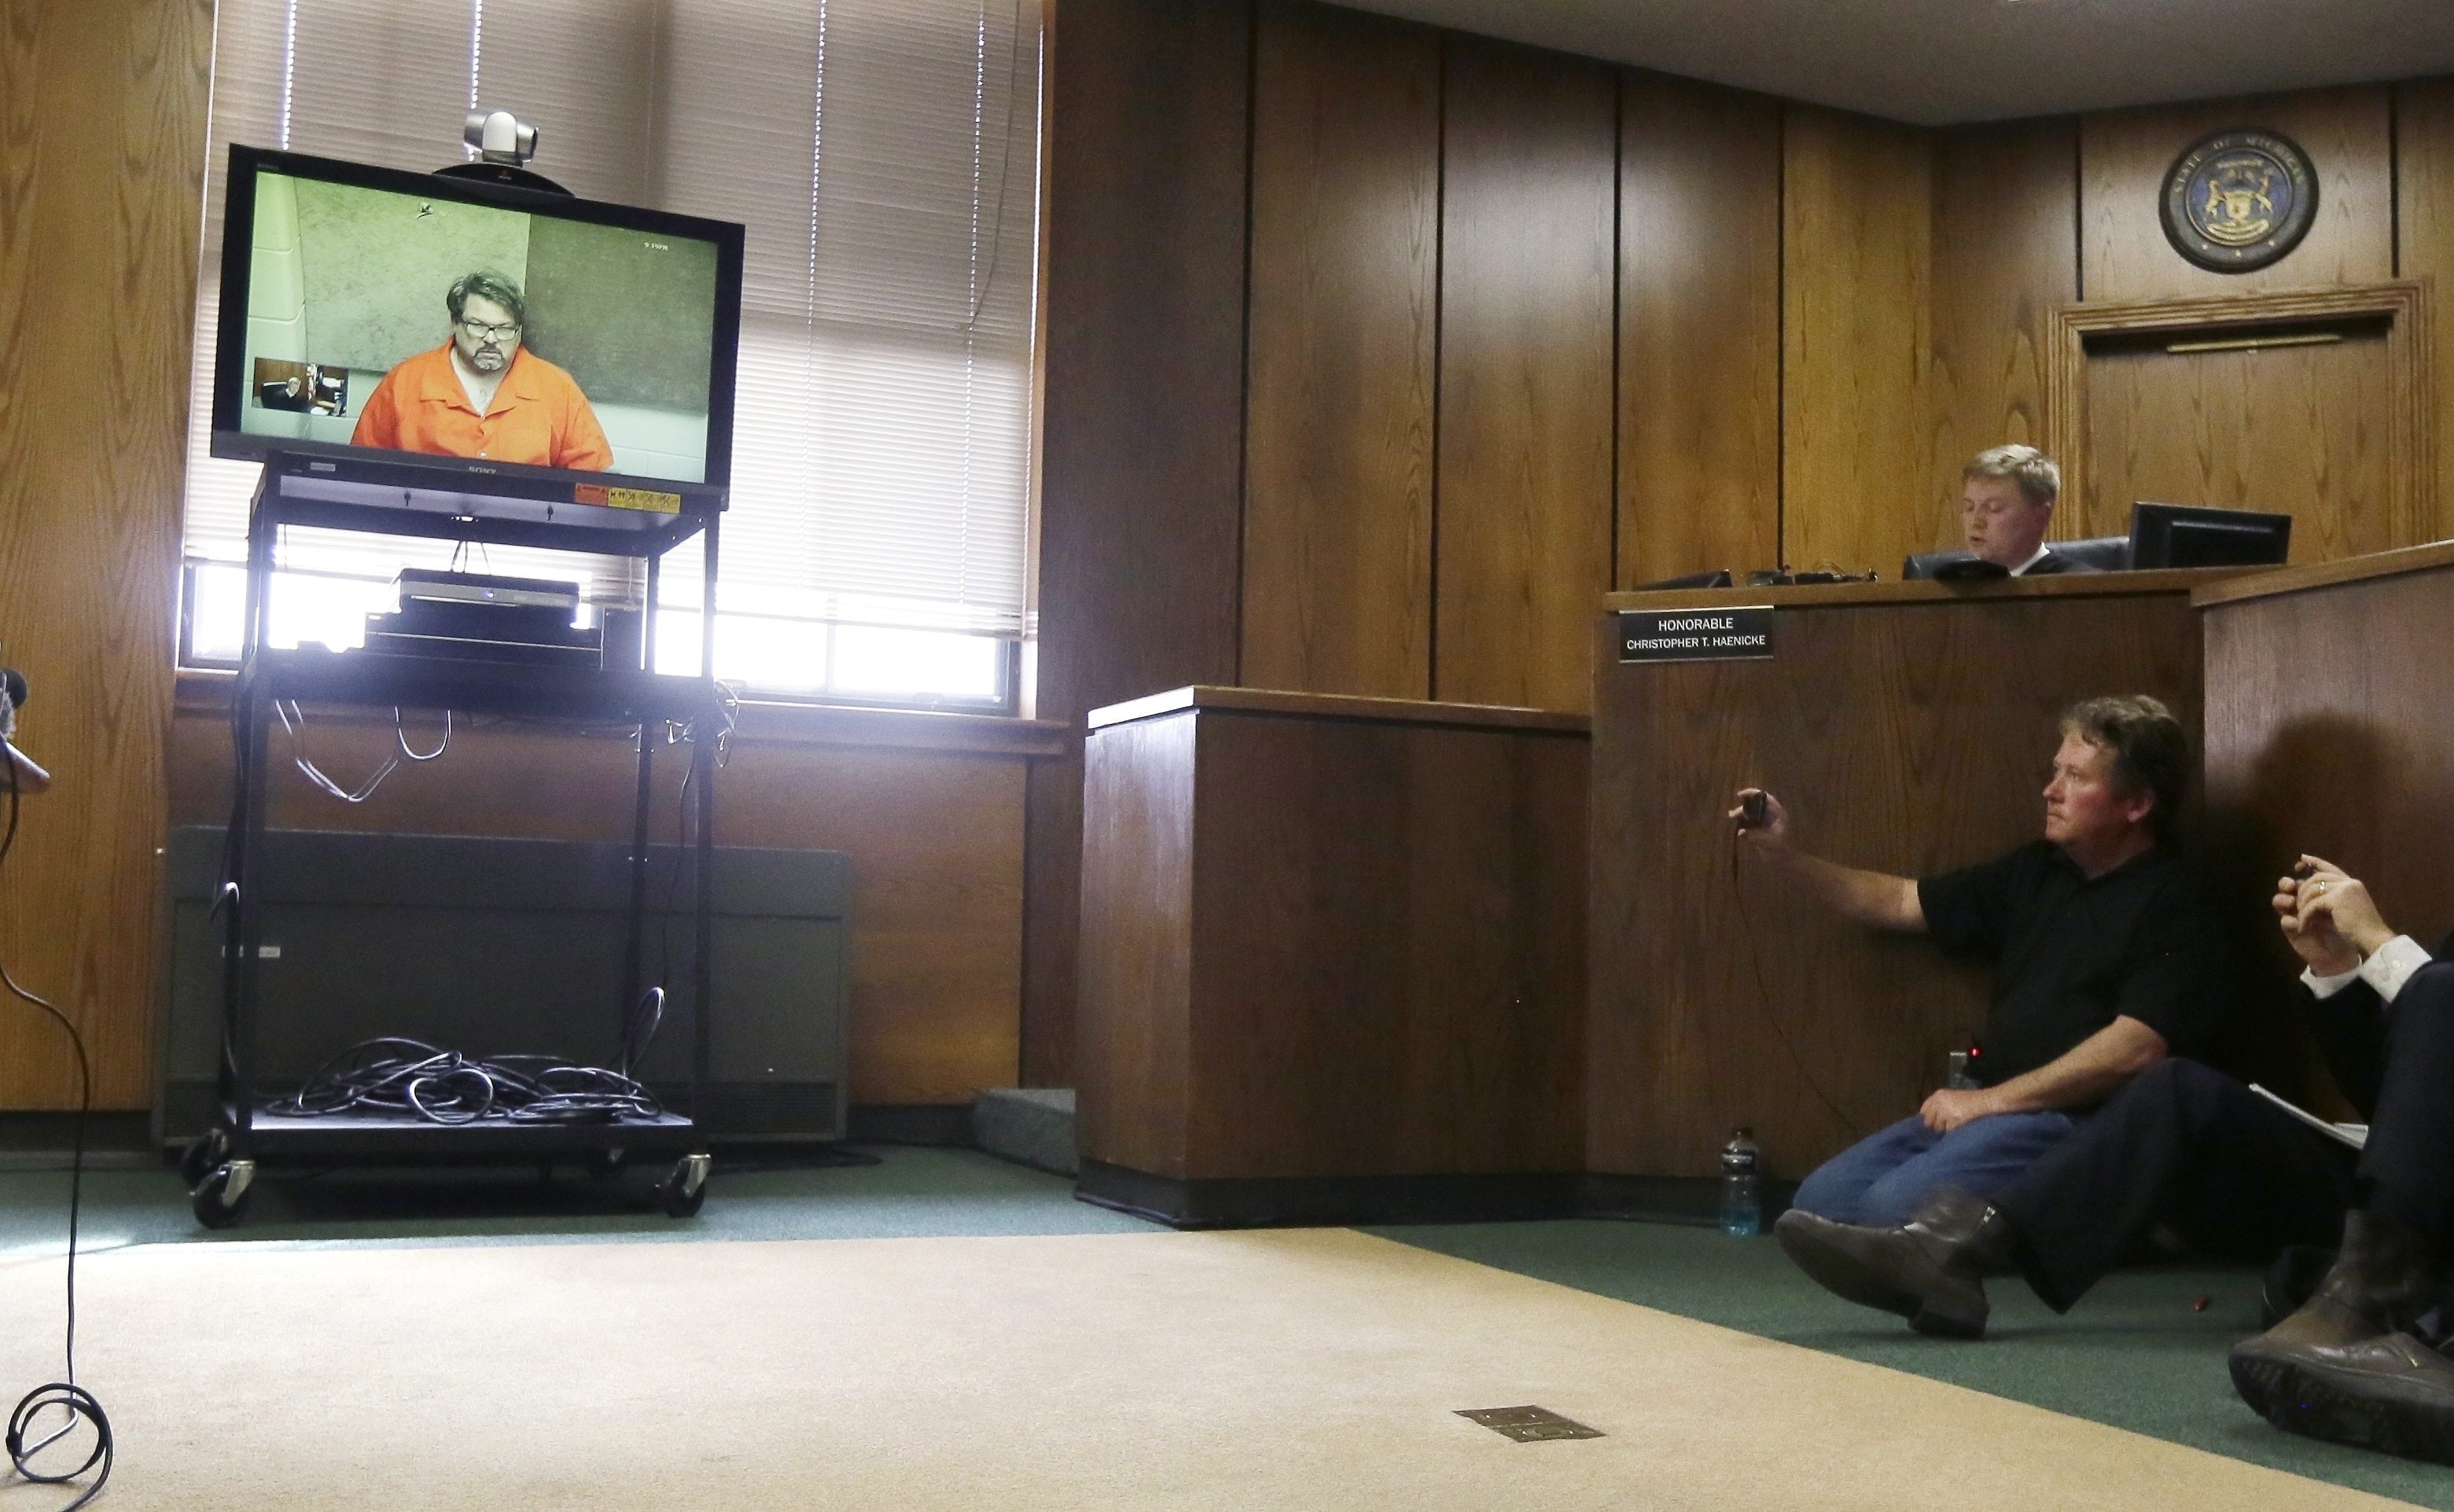 Jason Dalton is arraigned via video Monday before Judge Christopher T. Haenicke in Kalamazoo, Mich. Dalton is charged with six counts of murder and two counts of attempted murder in a series of random shootings in western Michigan.